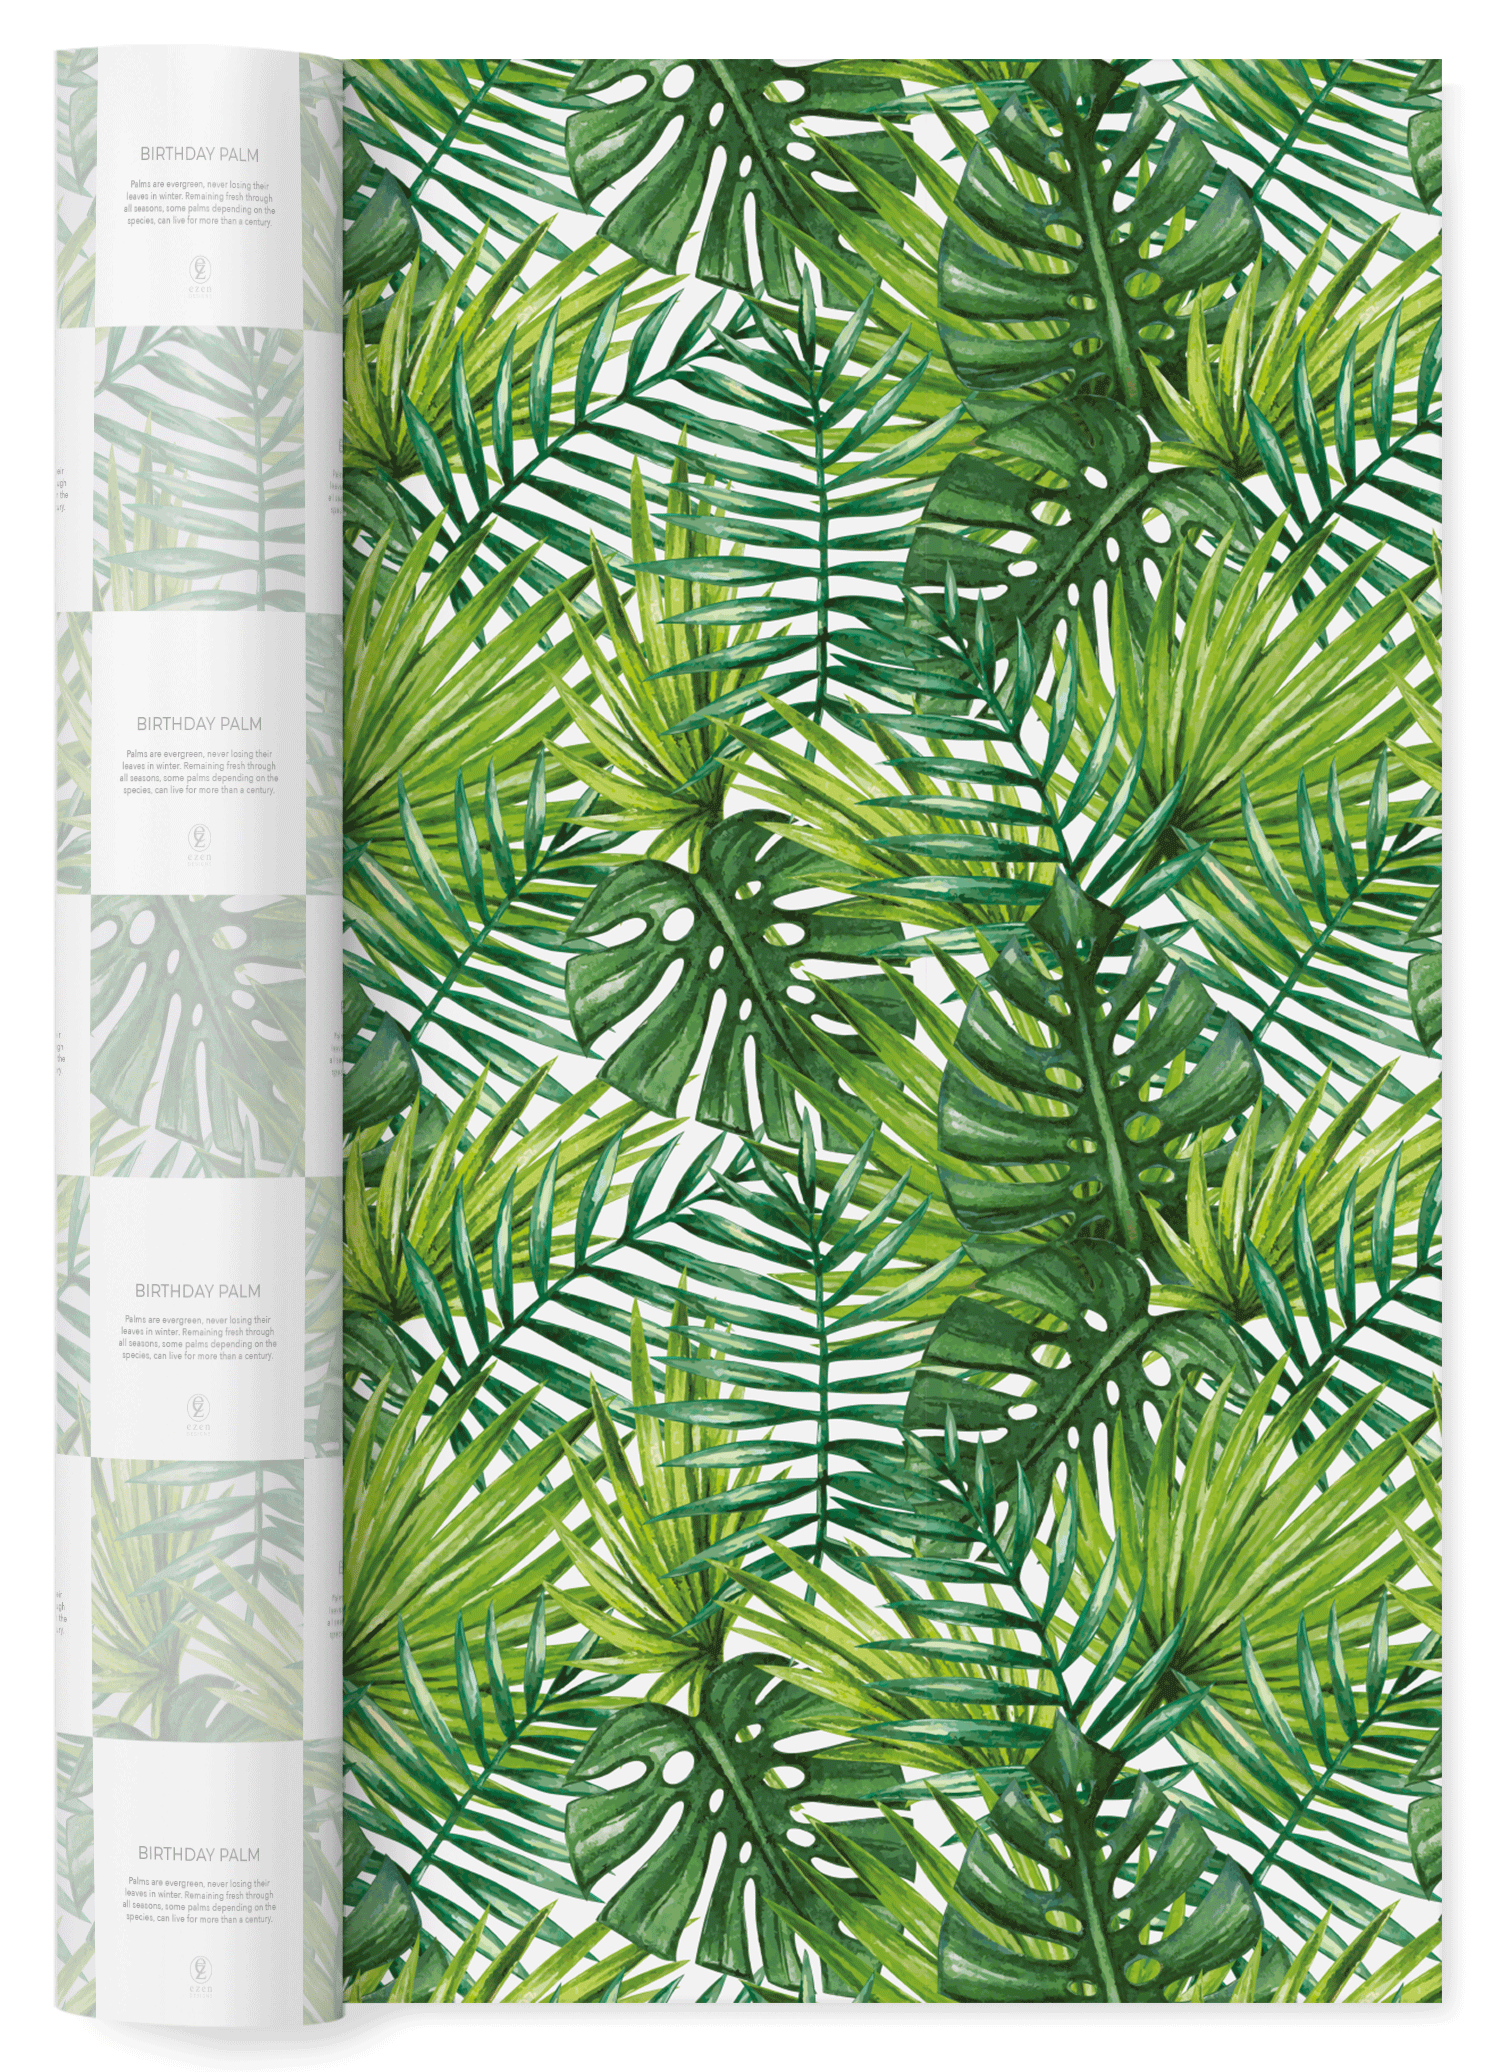 BIRTHDAY PALM: Wrapping Paper